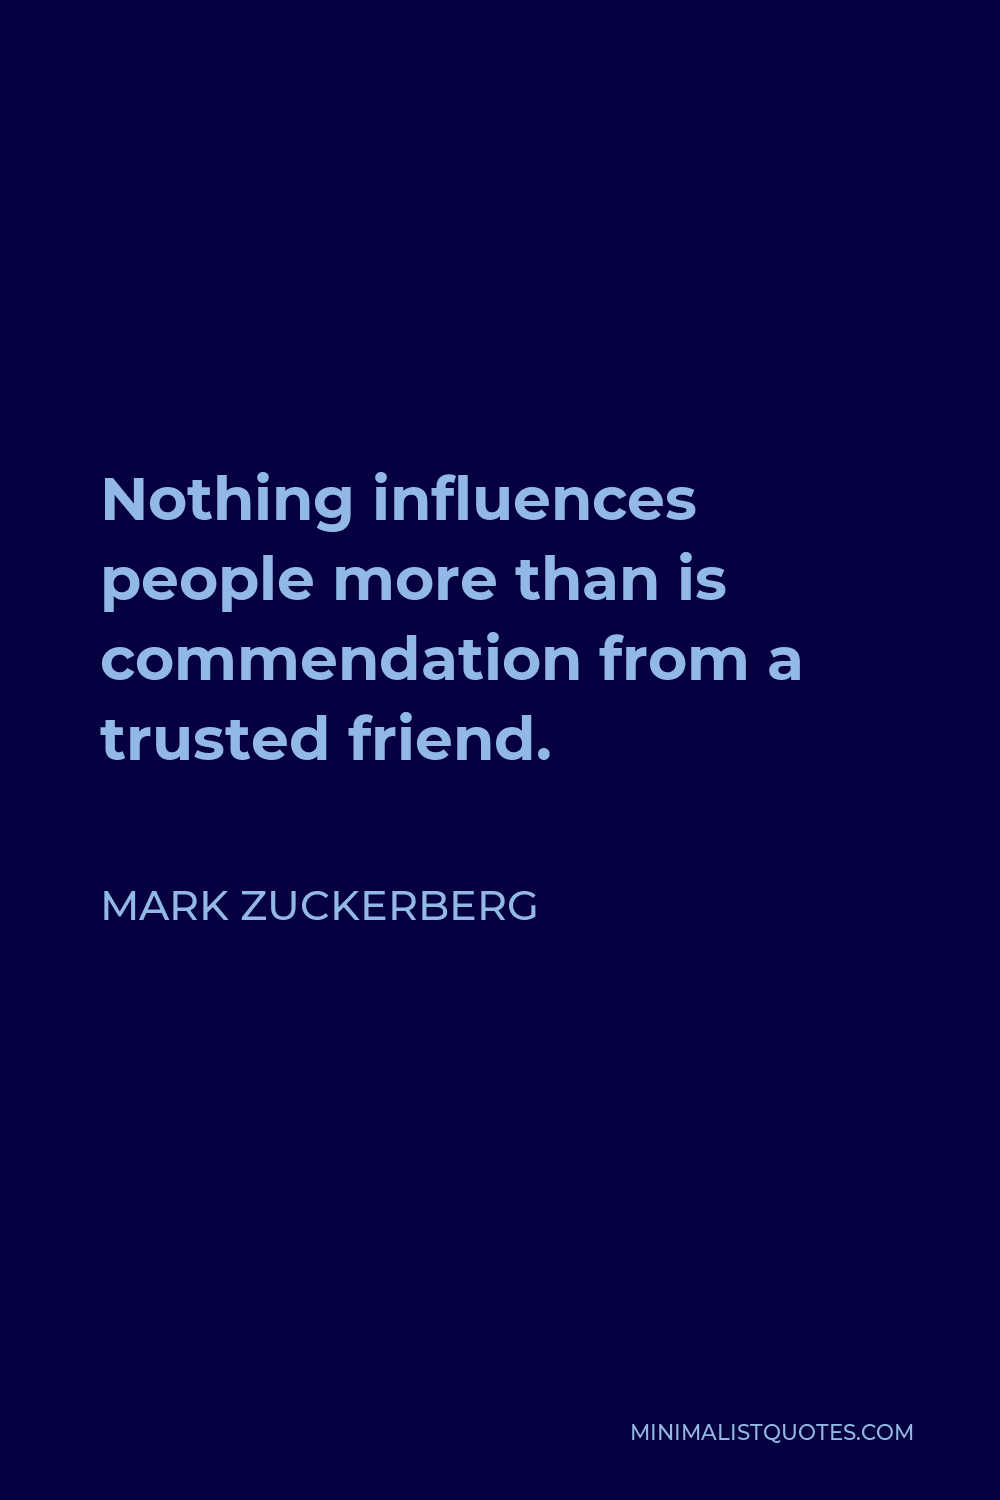 Mark Zuckerberg Quote - Nothing influences people more than is commendation from a trusted friend.